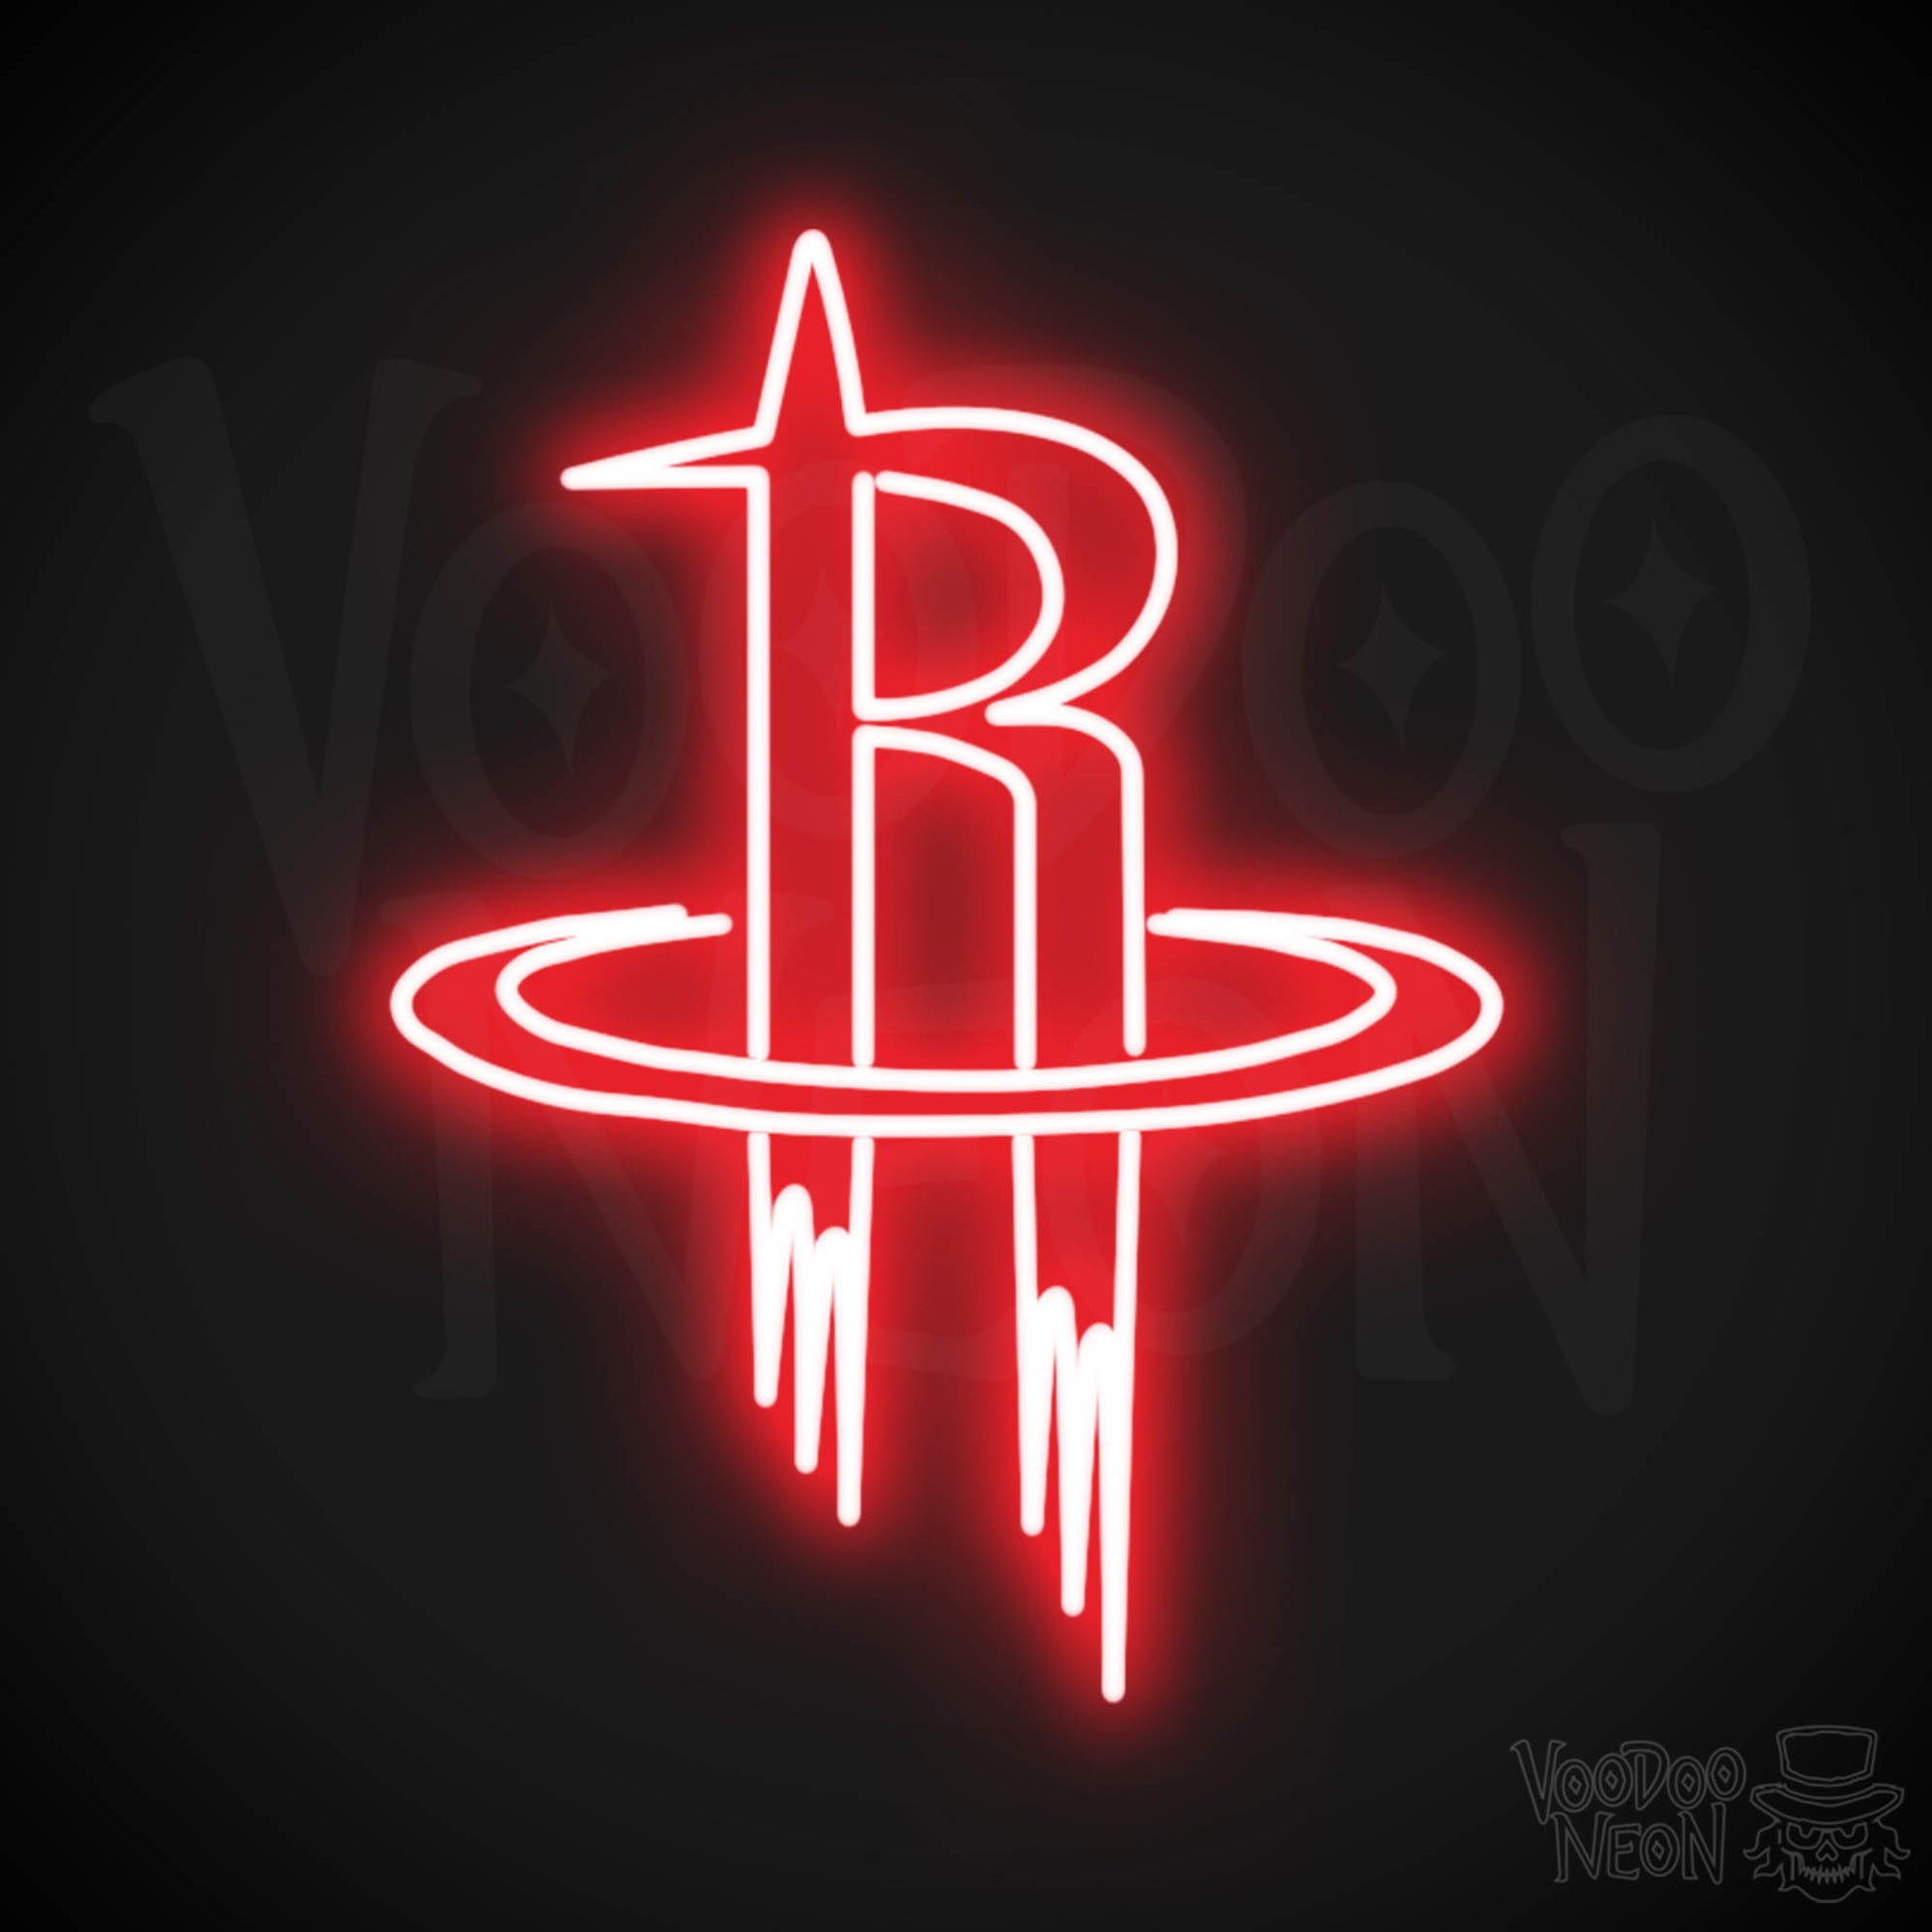 Houston Rockets Neon Sign - Houston Rockets Sign - Neon Rockets Wall Art - Color Red